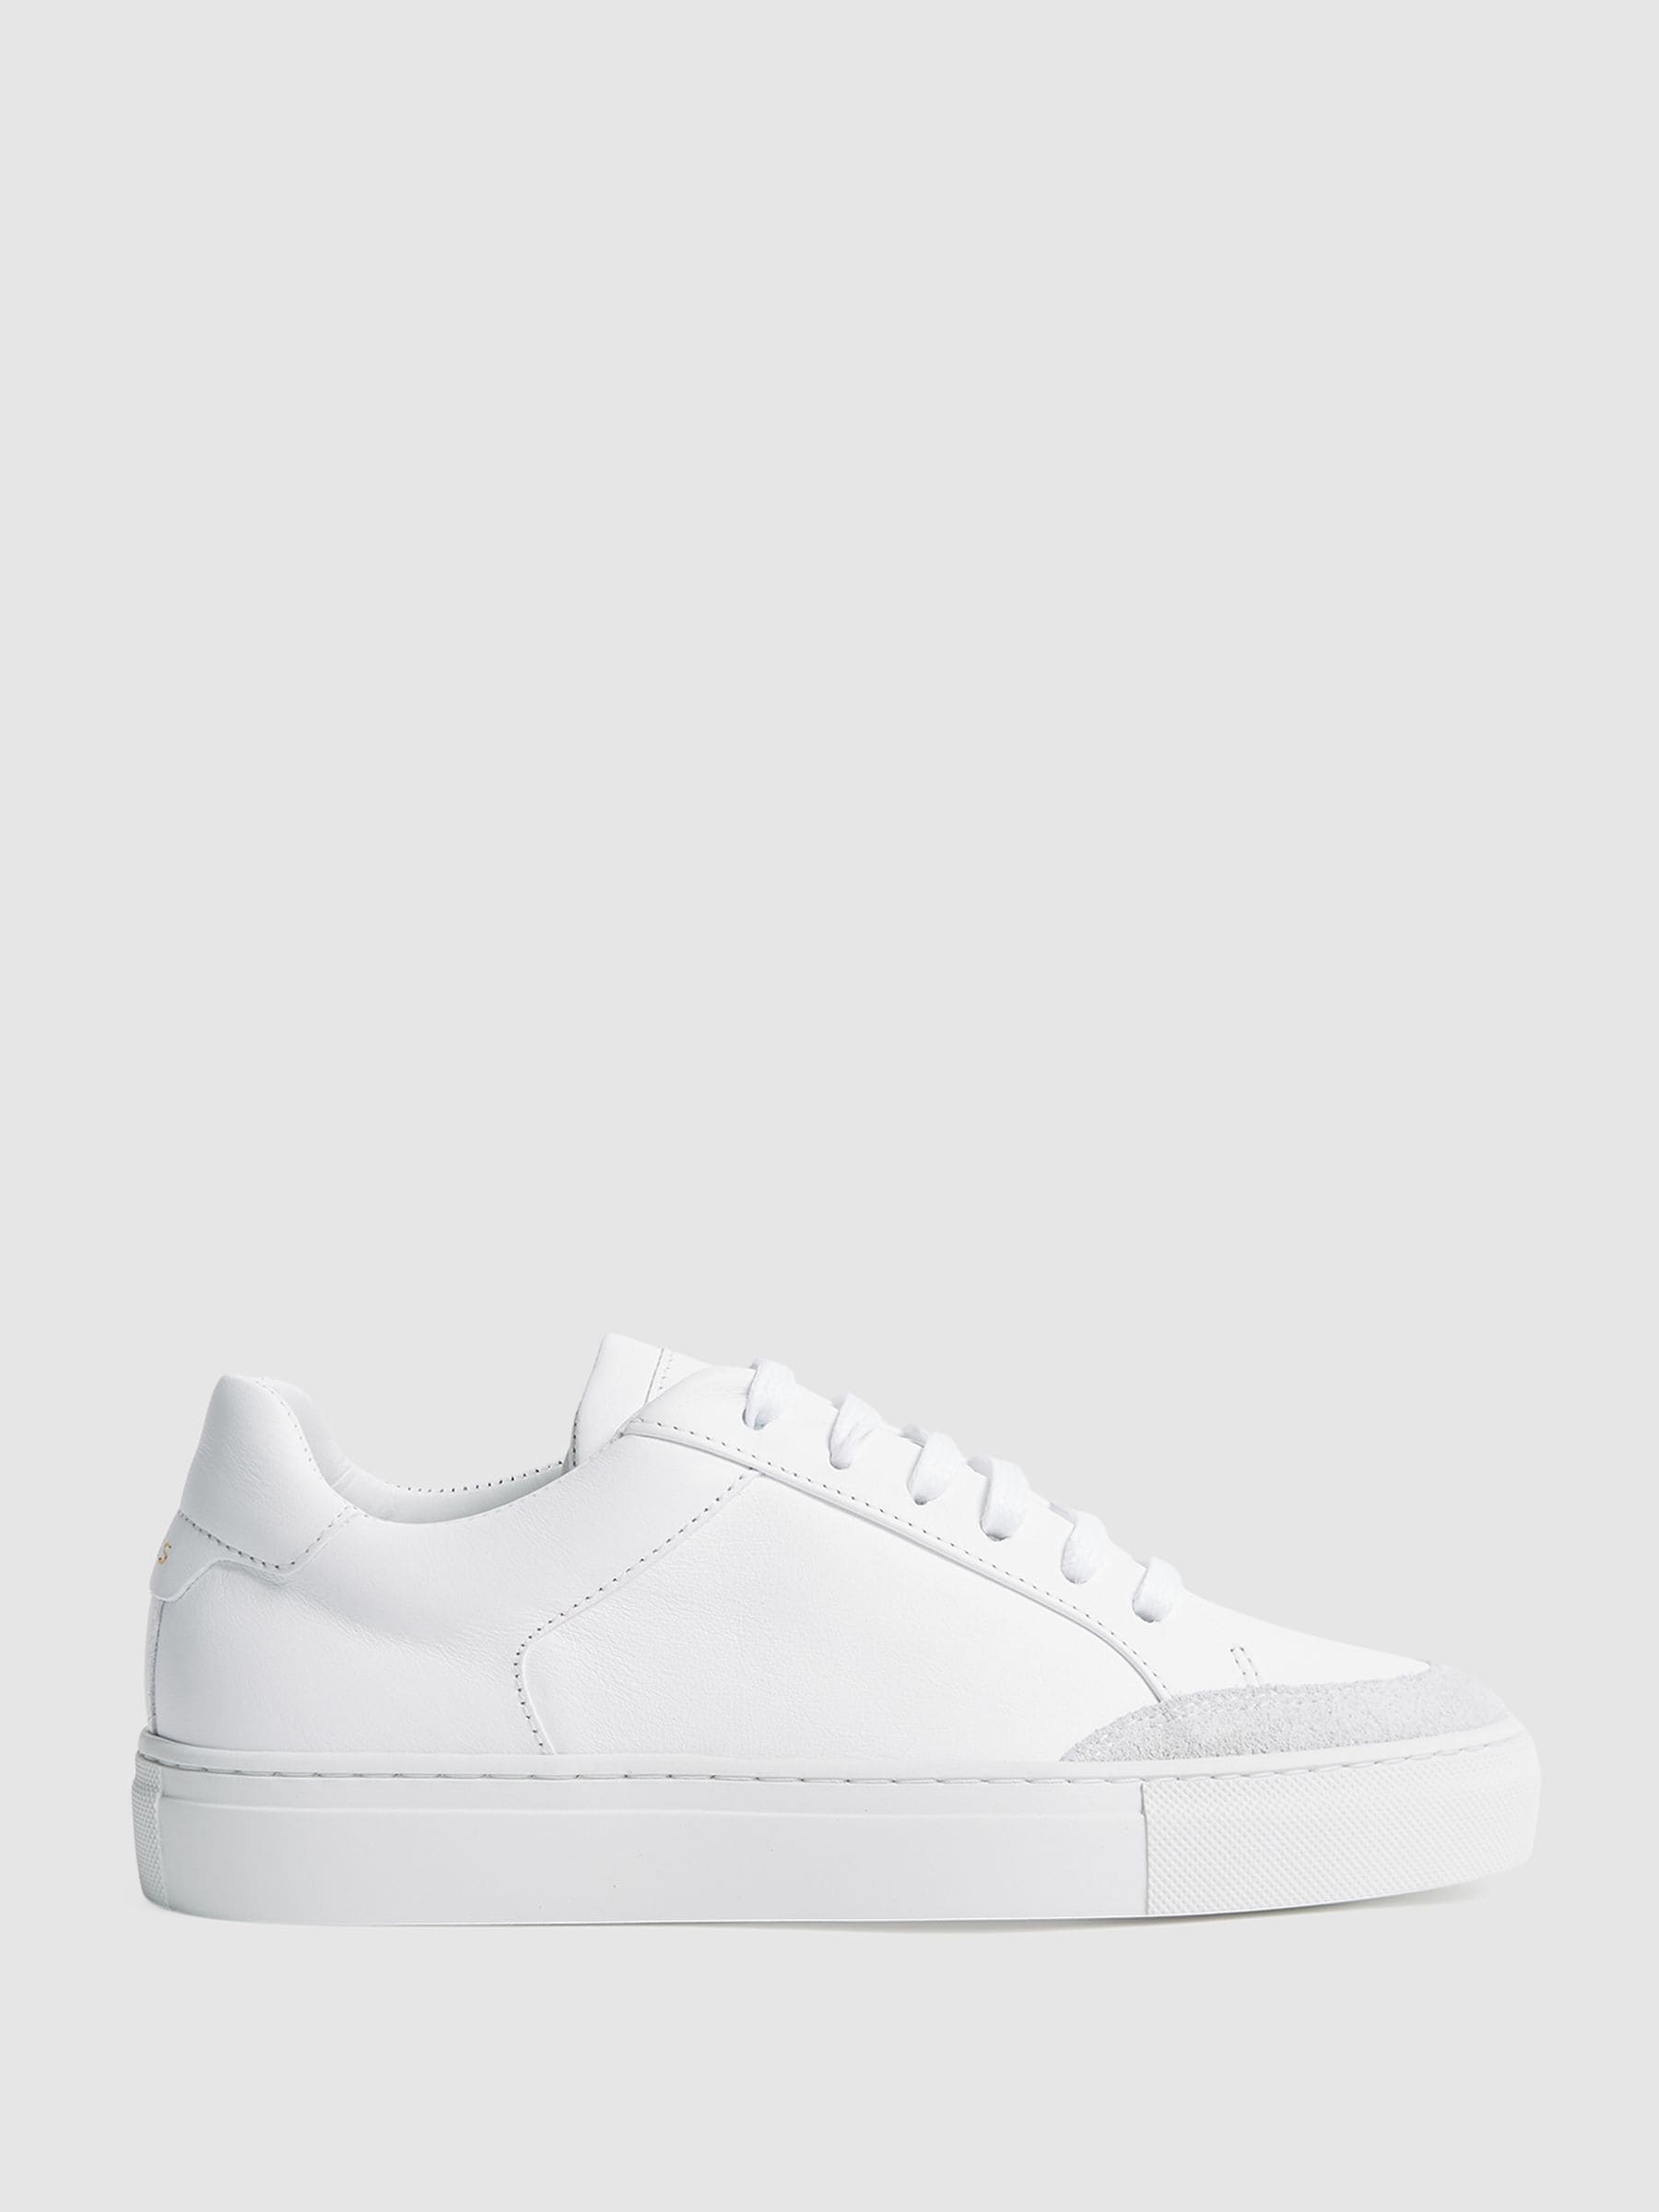 Reiss Ashley Leather Trainers - REISS